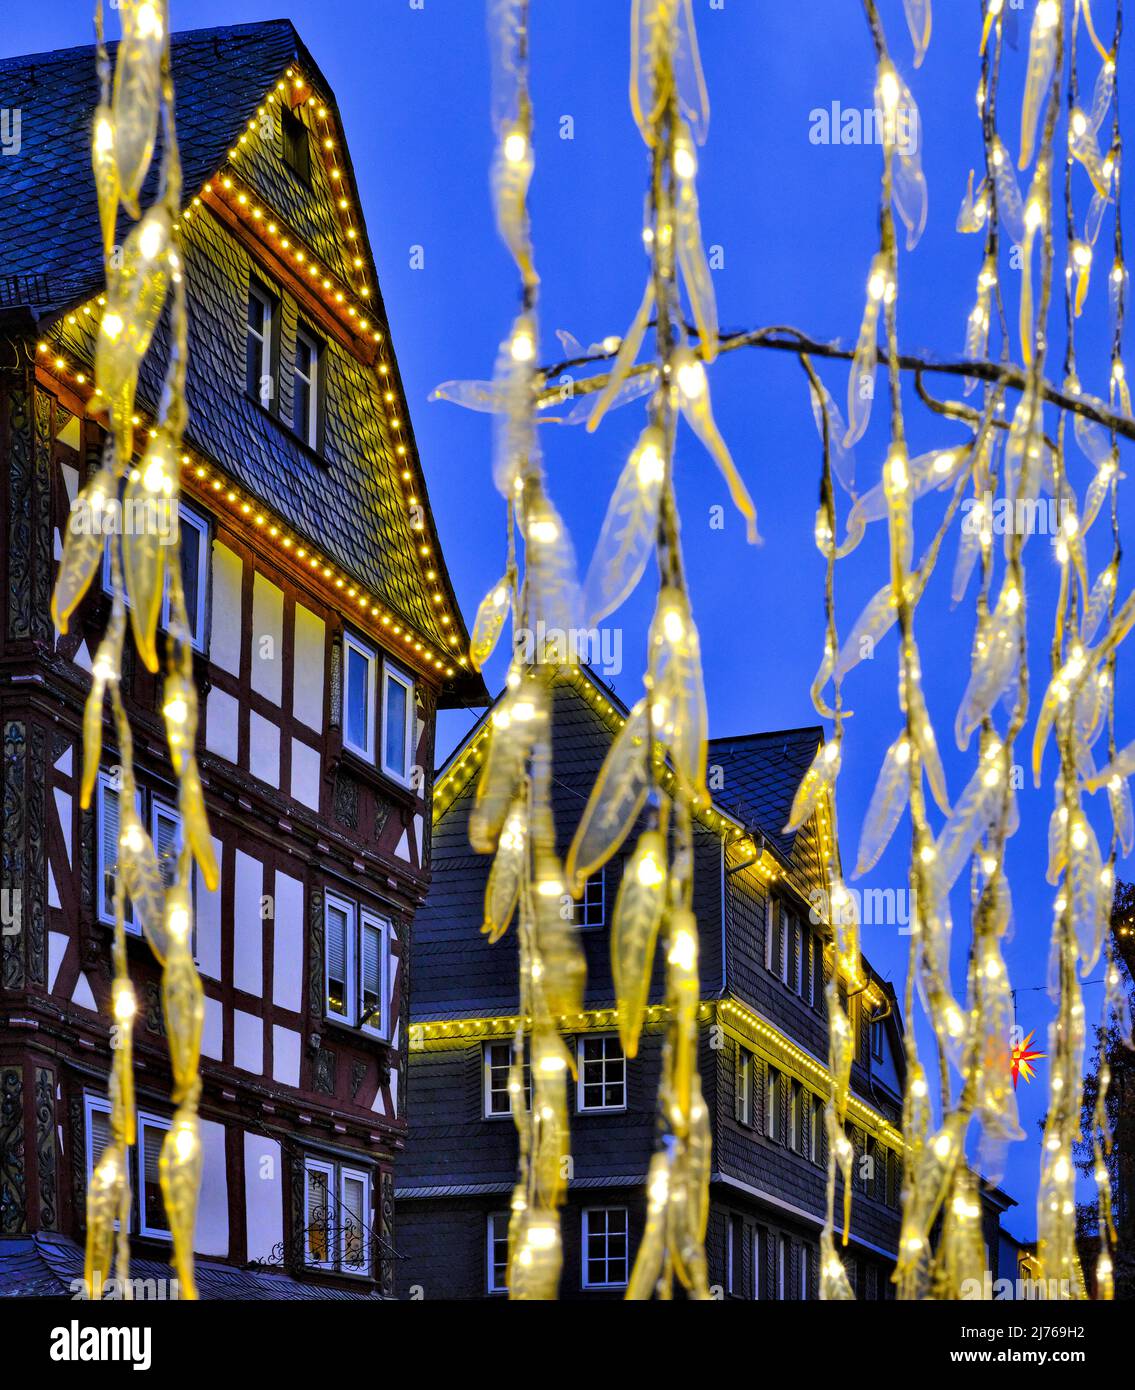 Europe, Germany, Hesse, city Herborn, historical old town, Christmas, Christmas lights, ice decoration Stock Photo